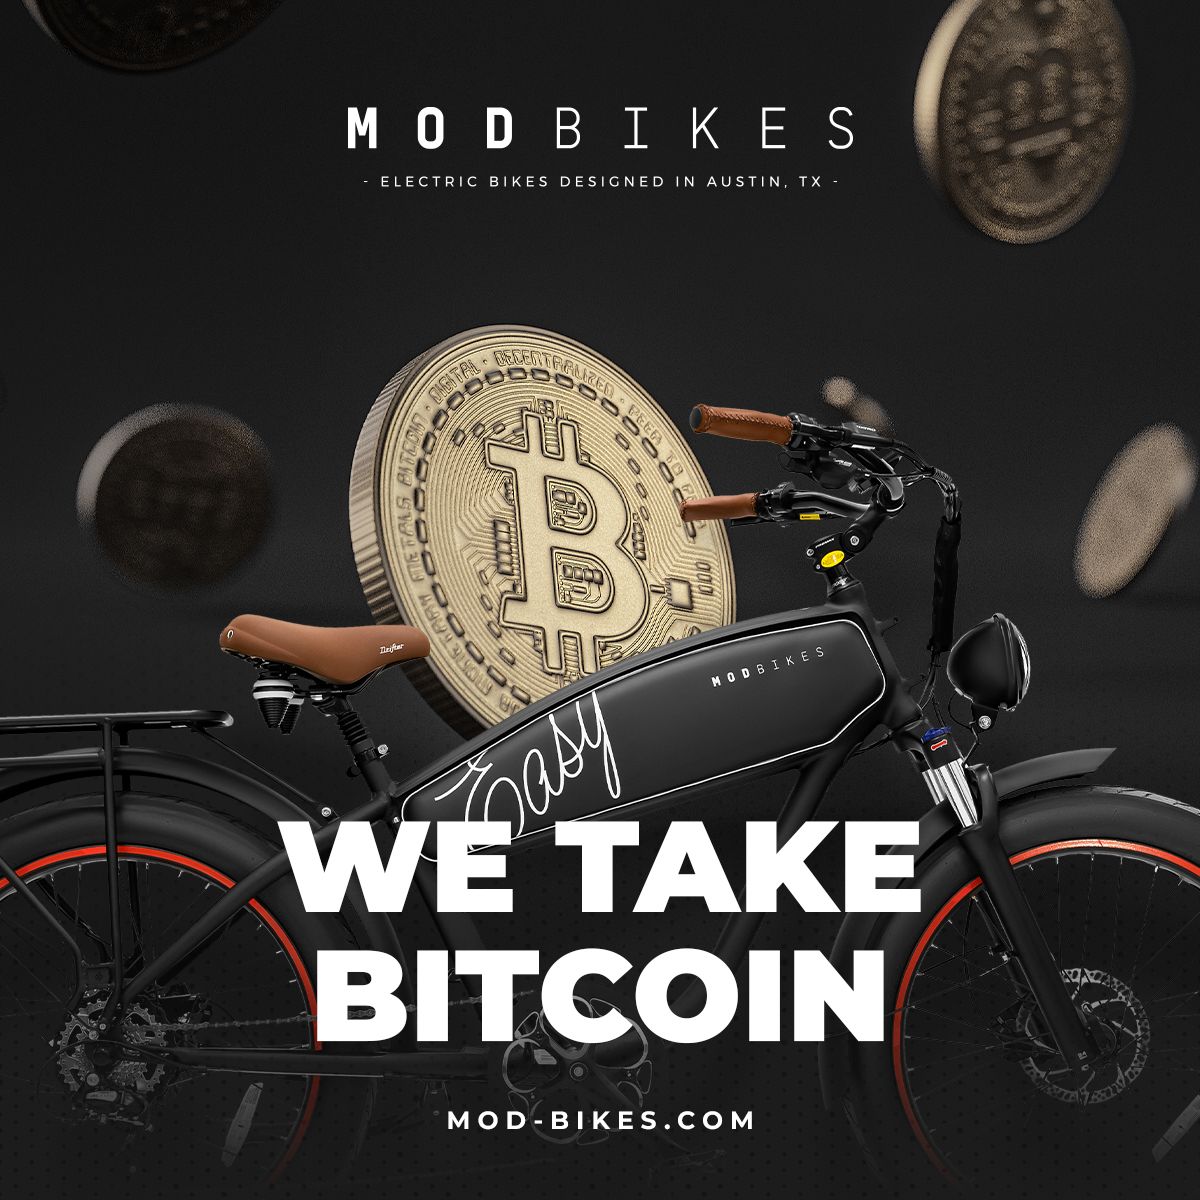 I loved working with the @ModbikesATX  team to integrate #bitcoin!

Dor and his team have developed a line of uniquely designed, quality e-bikes built to last. 

Based in Austin, TX, MOD is accepting #bitcoin via the #LightningNetwork in-store and online.

mod-bikes.com/pages/bitcoin